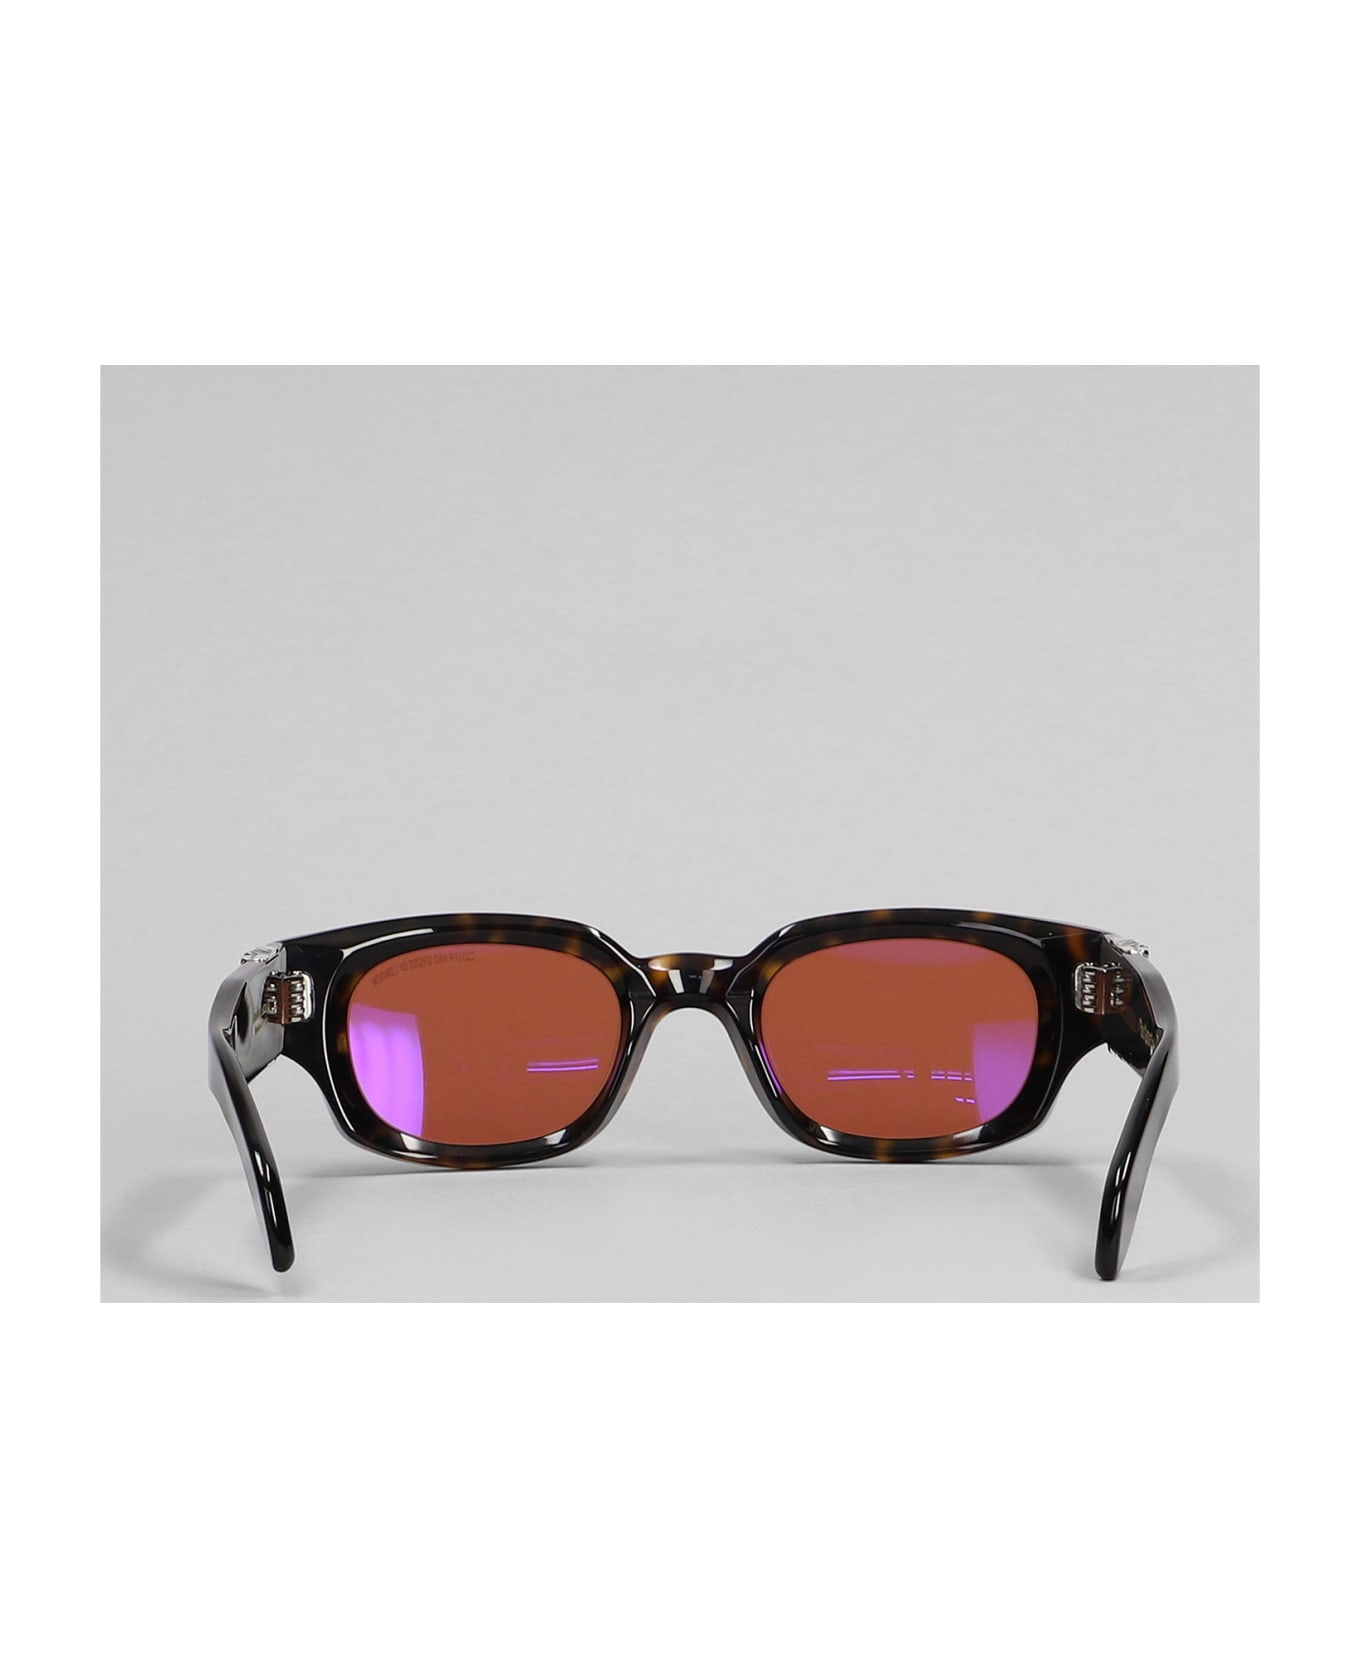 Cutler and Gross The Great Frog Sunglasses In Brown Acetate - brown